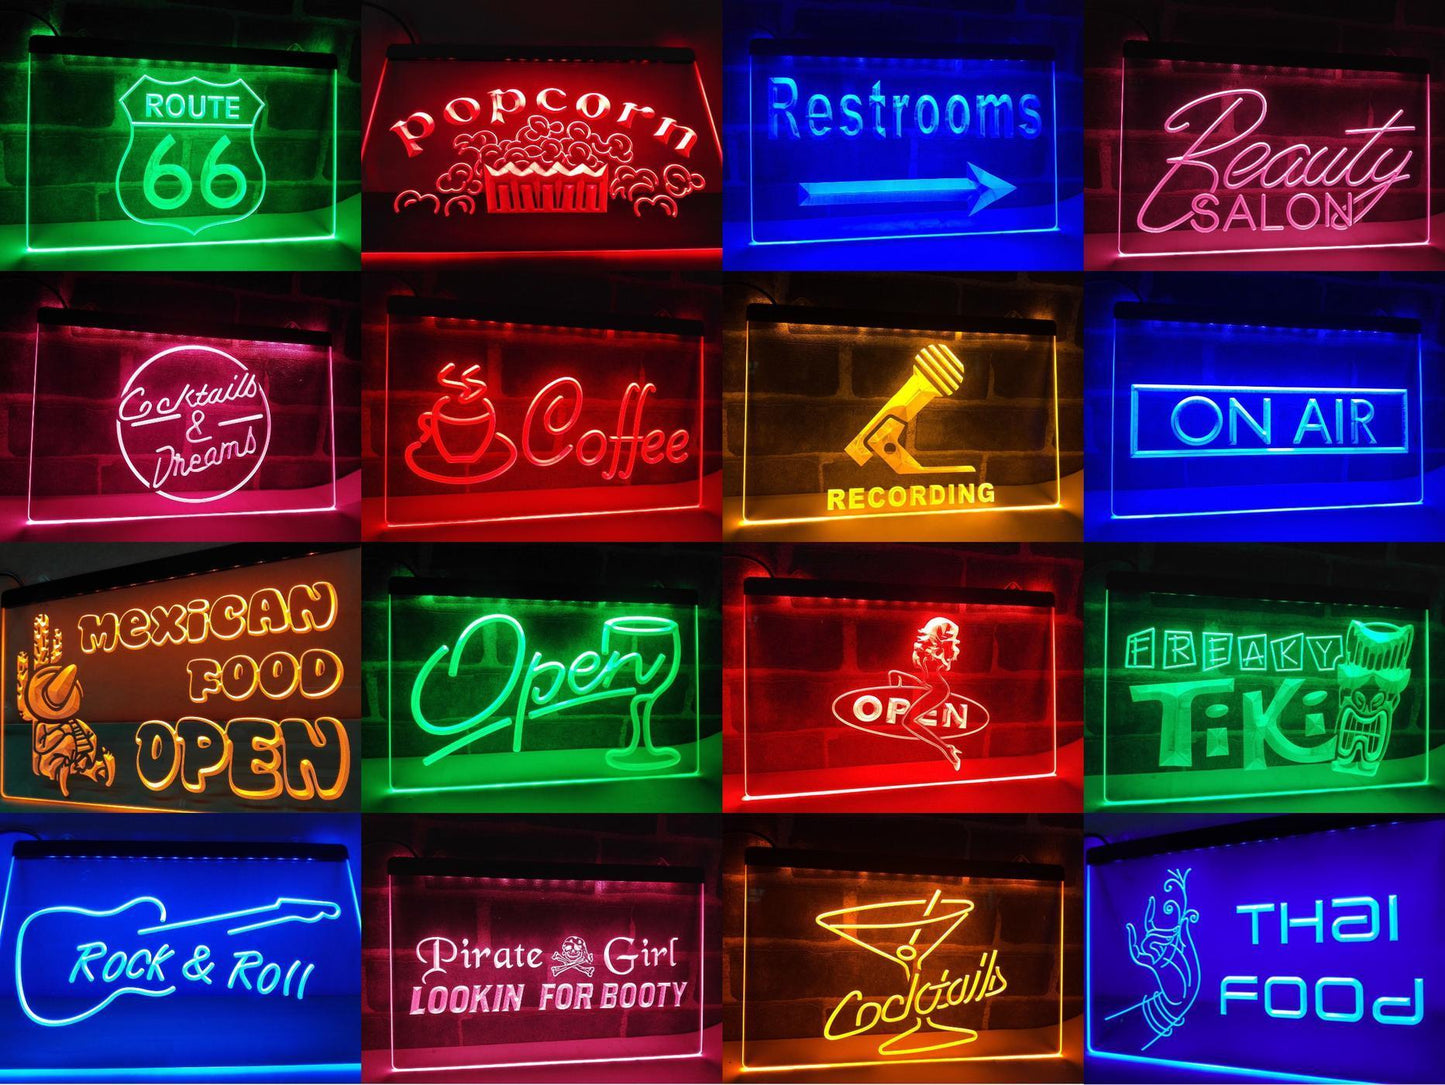 24 Hours Bail Bonds LED Neon Light Sign - Way Up Gifts